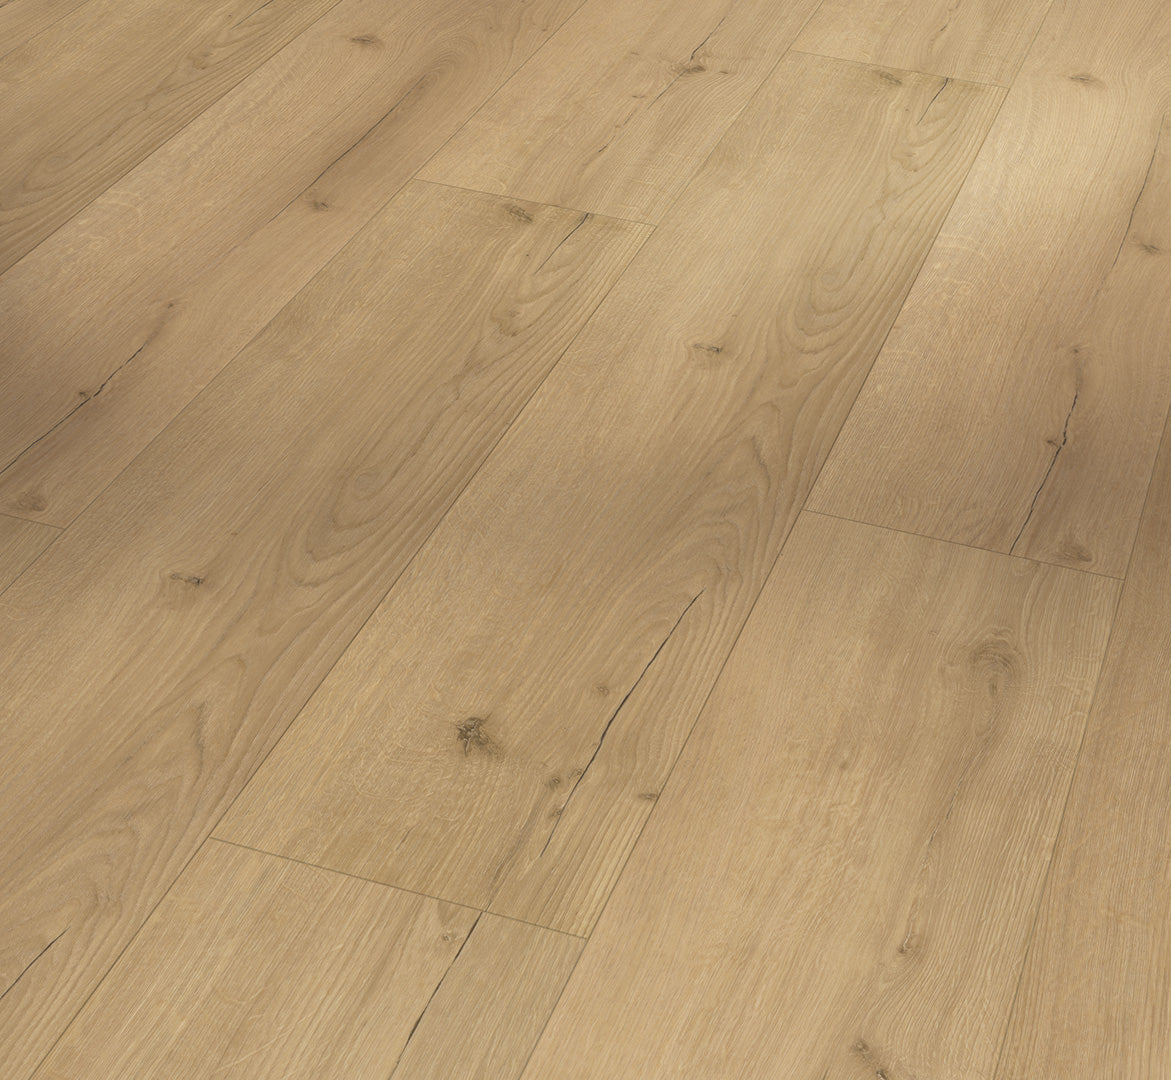 Oak Infinity Natural - Basic 5.3 SPC 4V Class 32 Wide Plank (Commercial)